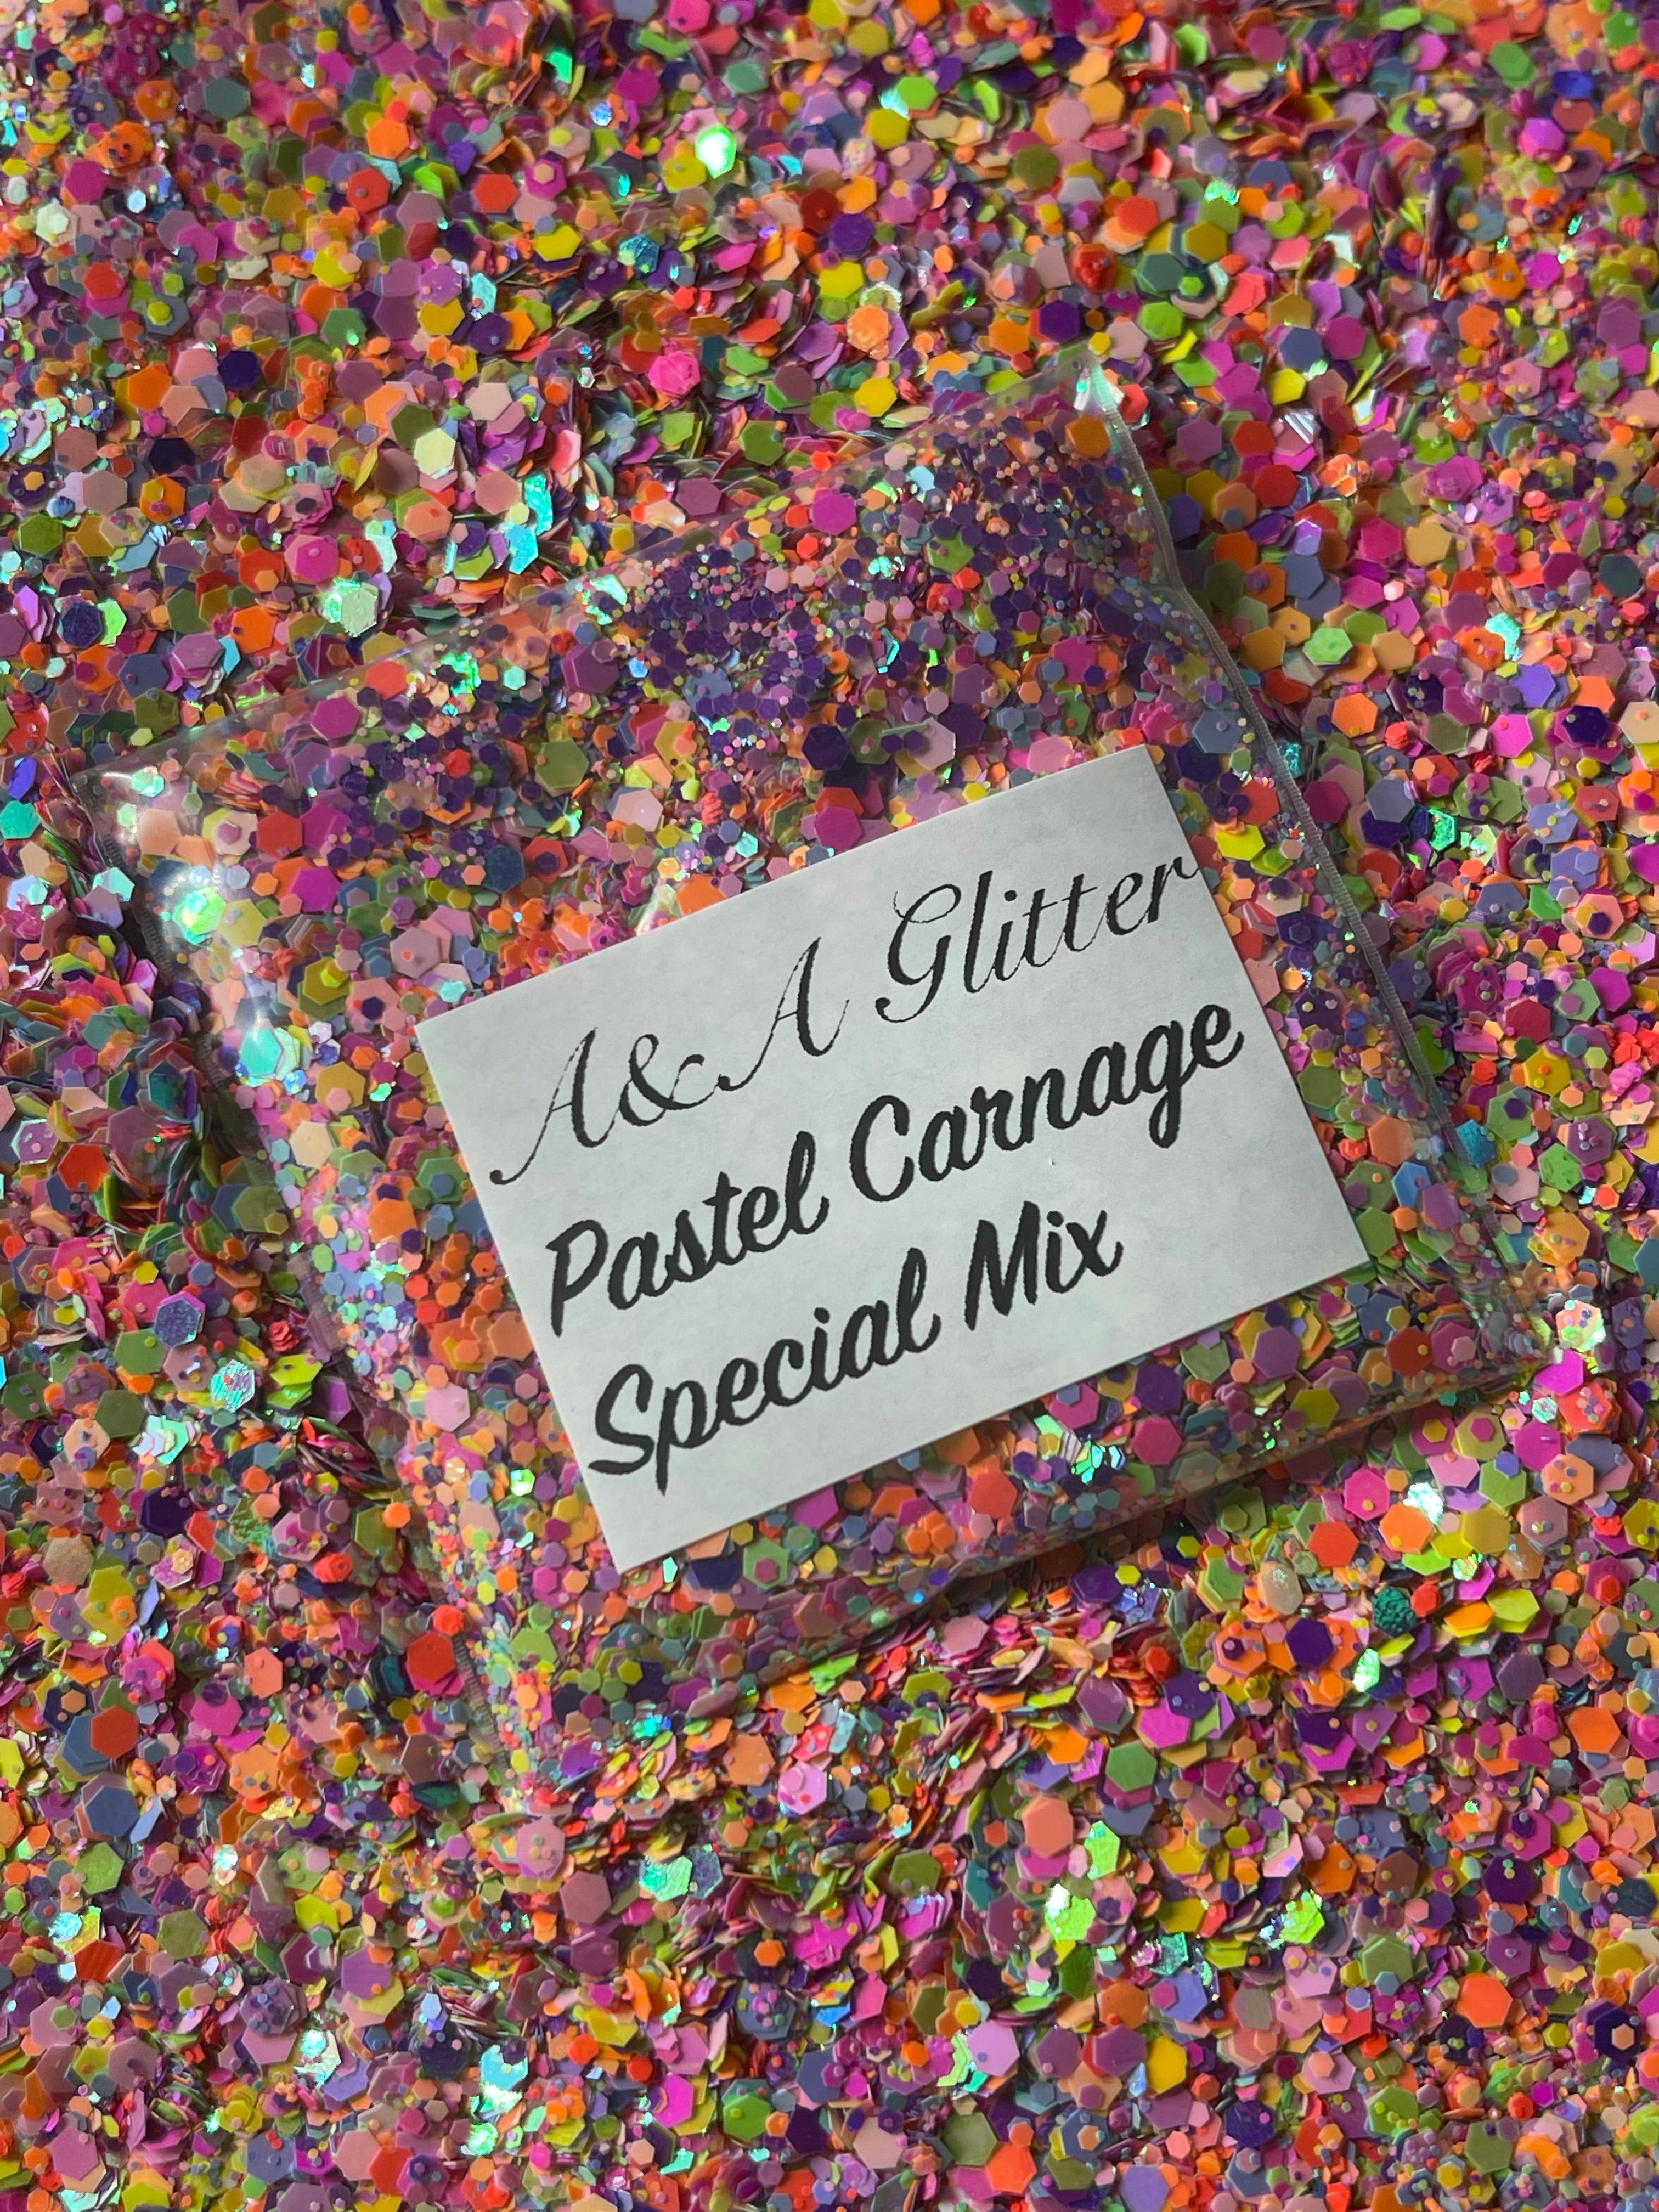 Pastel Carnage - Special Mix